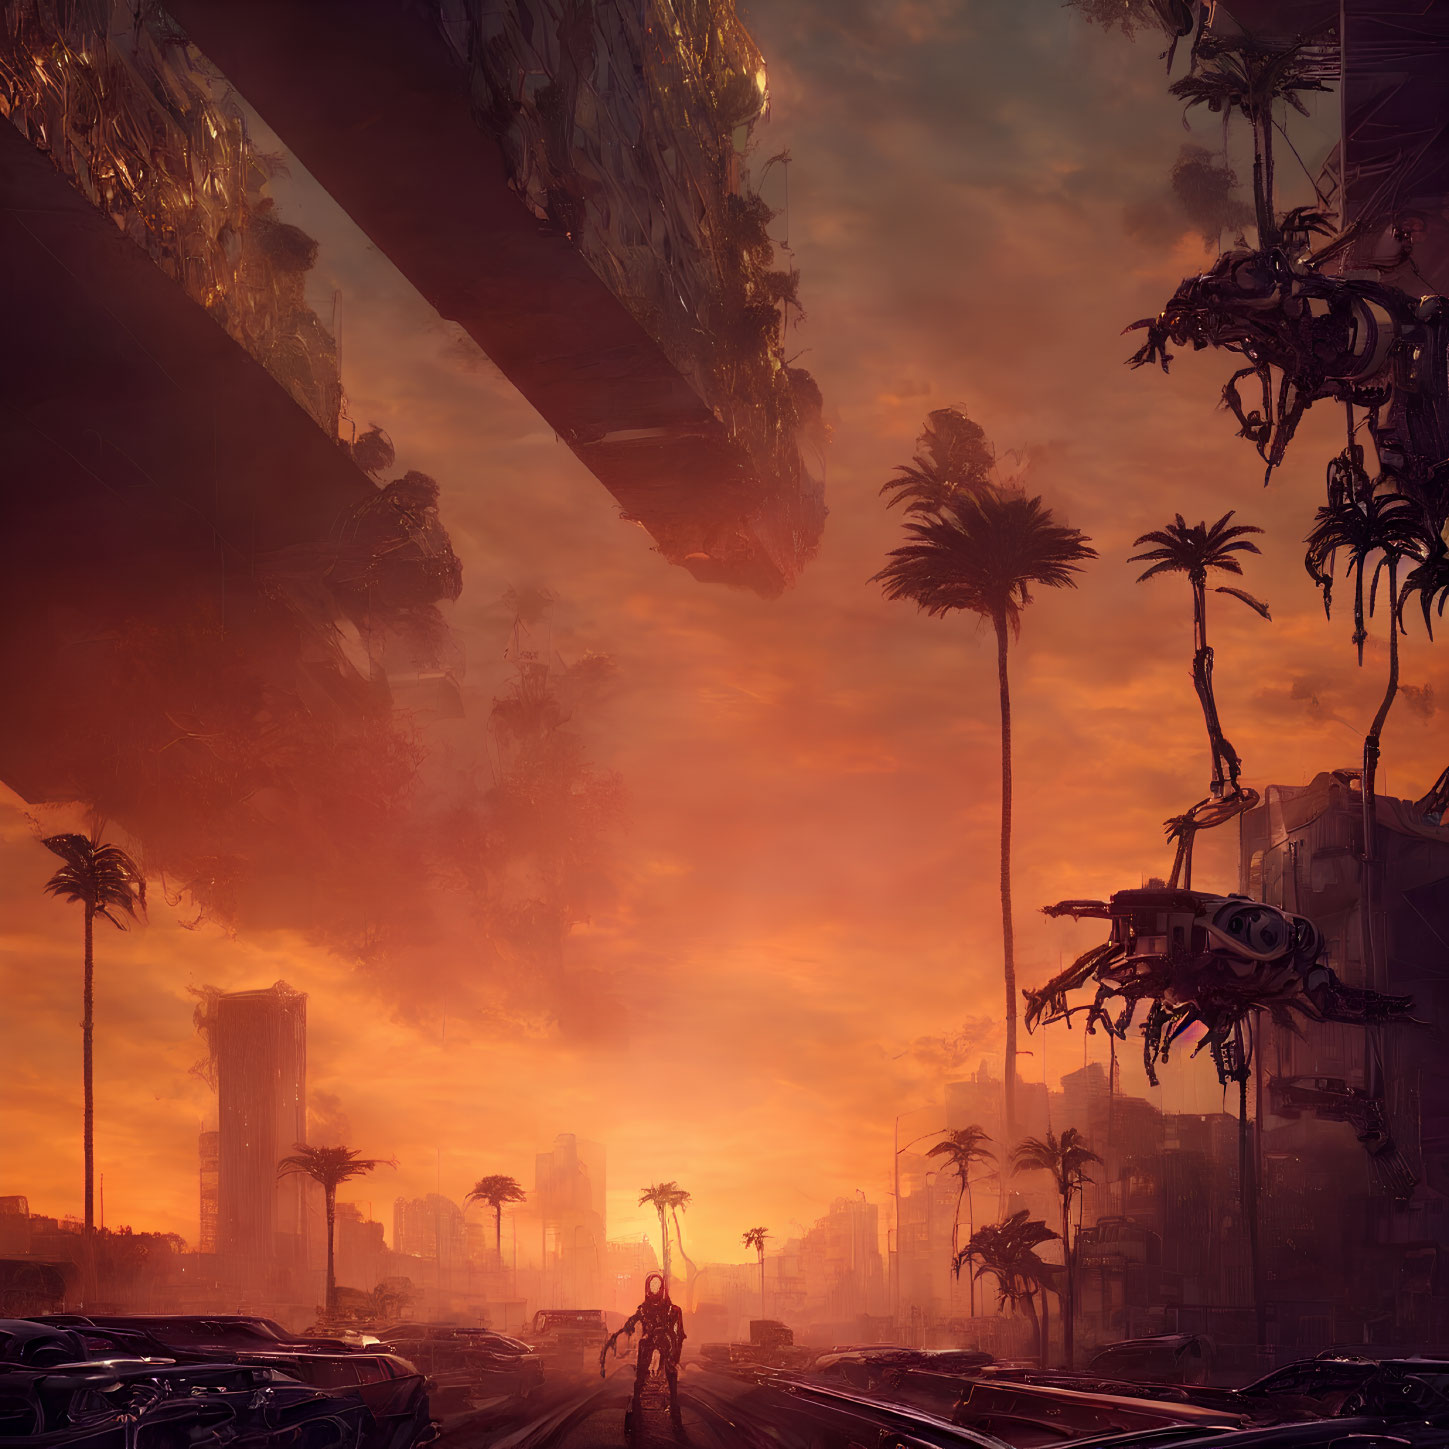 Sunset post-apocalyptic cityscape with ruins, figure, palm trees, and hovering vehicle.